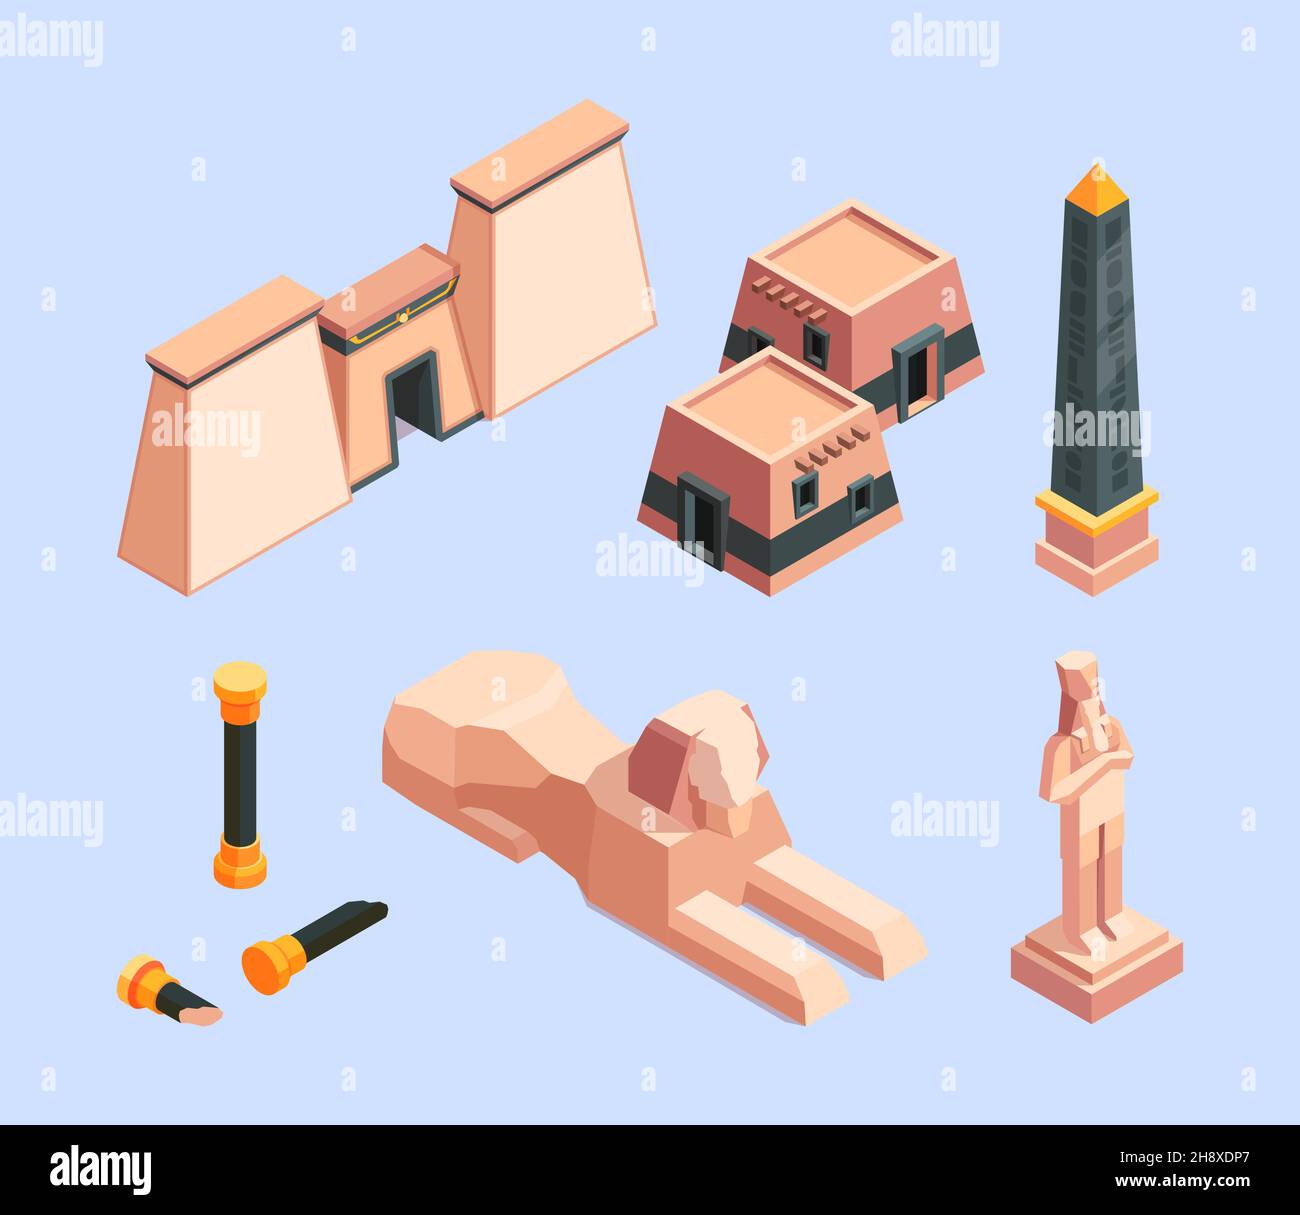 Ancient egypt. Architectural old objects of egypt pyramid buildings desert historical constructions garish vector isometric illustrations Stock Vector